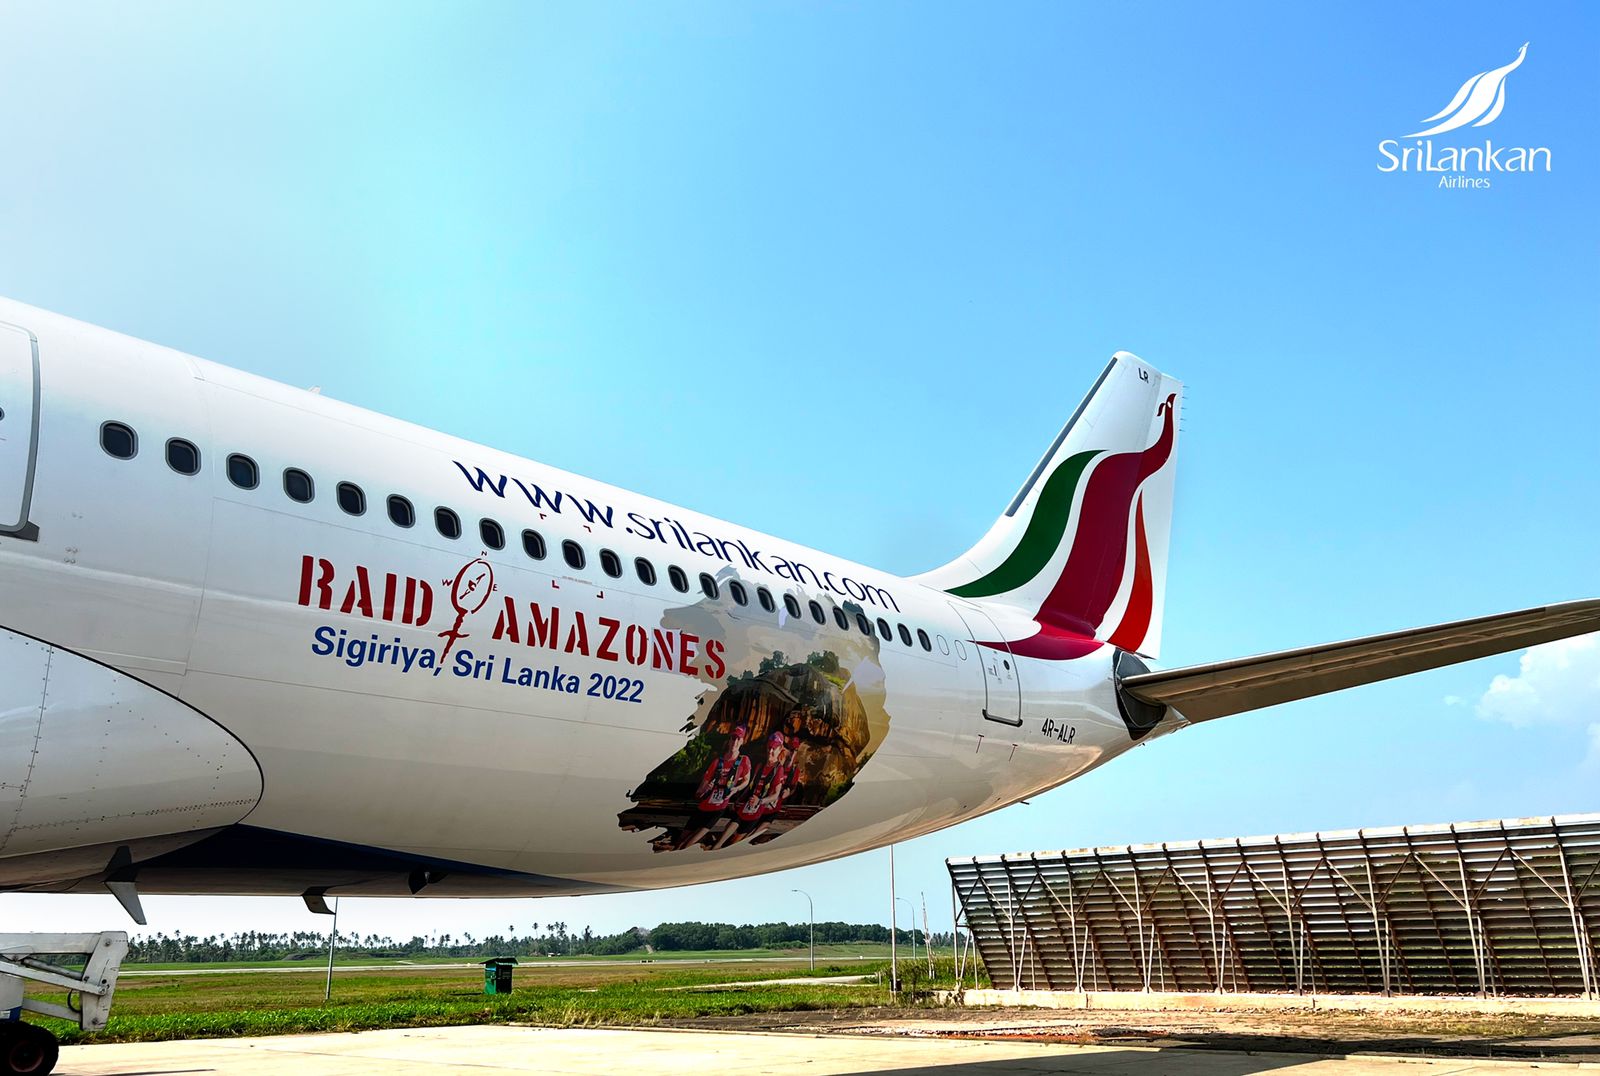 SriLankan Airlines aircraft with the customized livery celebrating ‘Raid Amazones 2022’